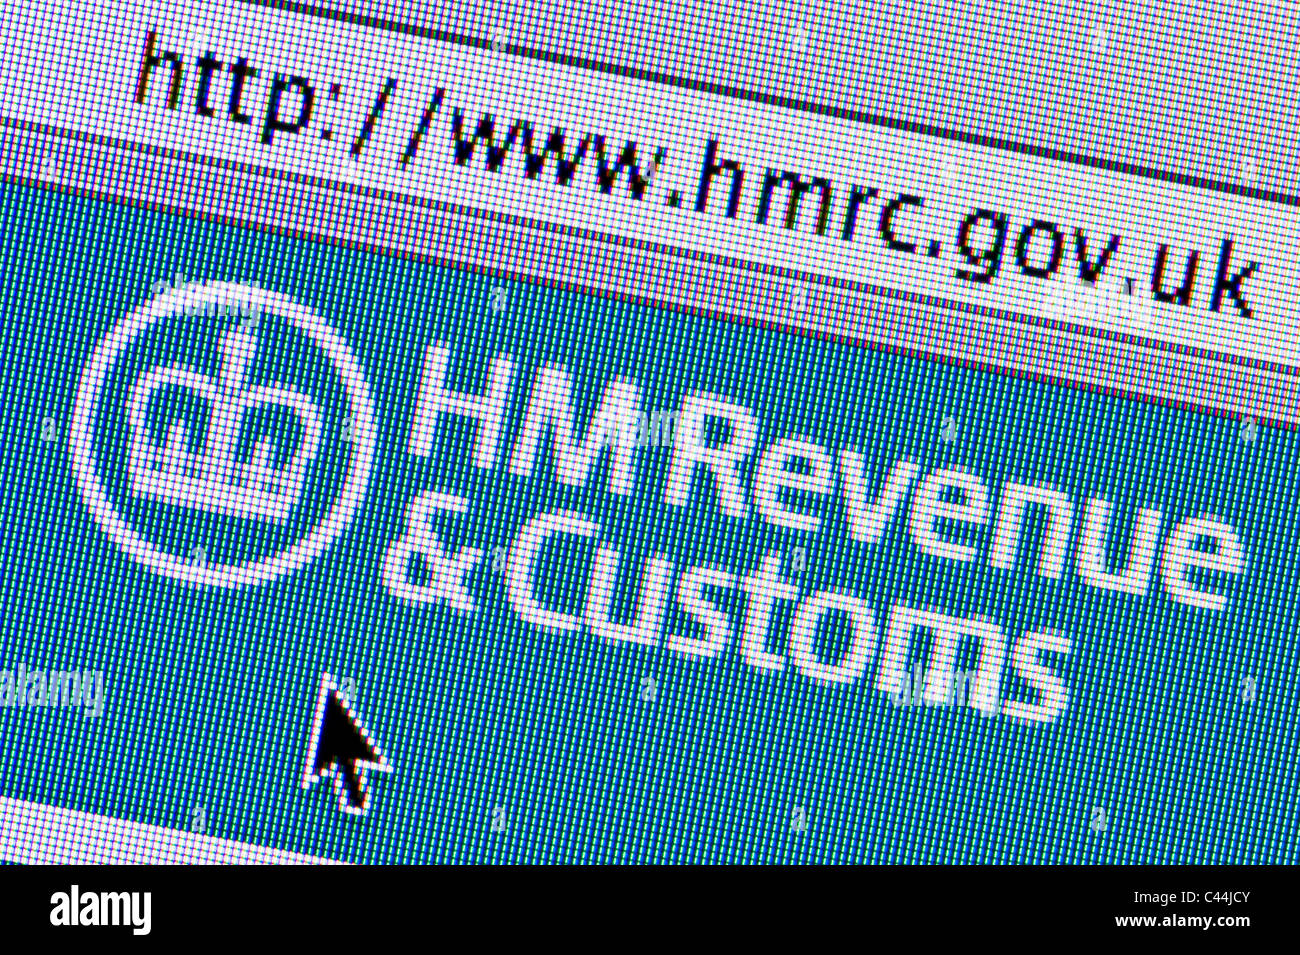 Close up of the HMRC logo as seen on its website. (Editorial use only: print, TV, e-book and editorial website). Stock Photo